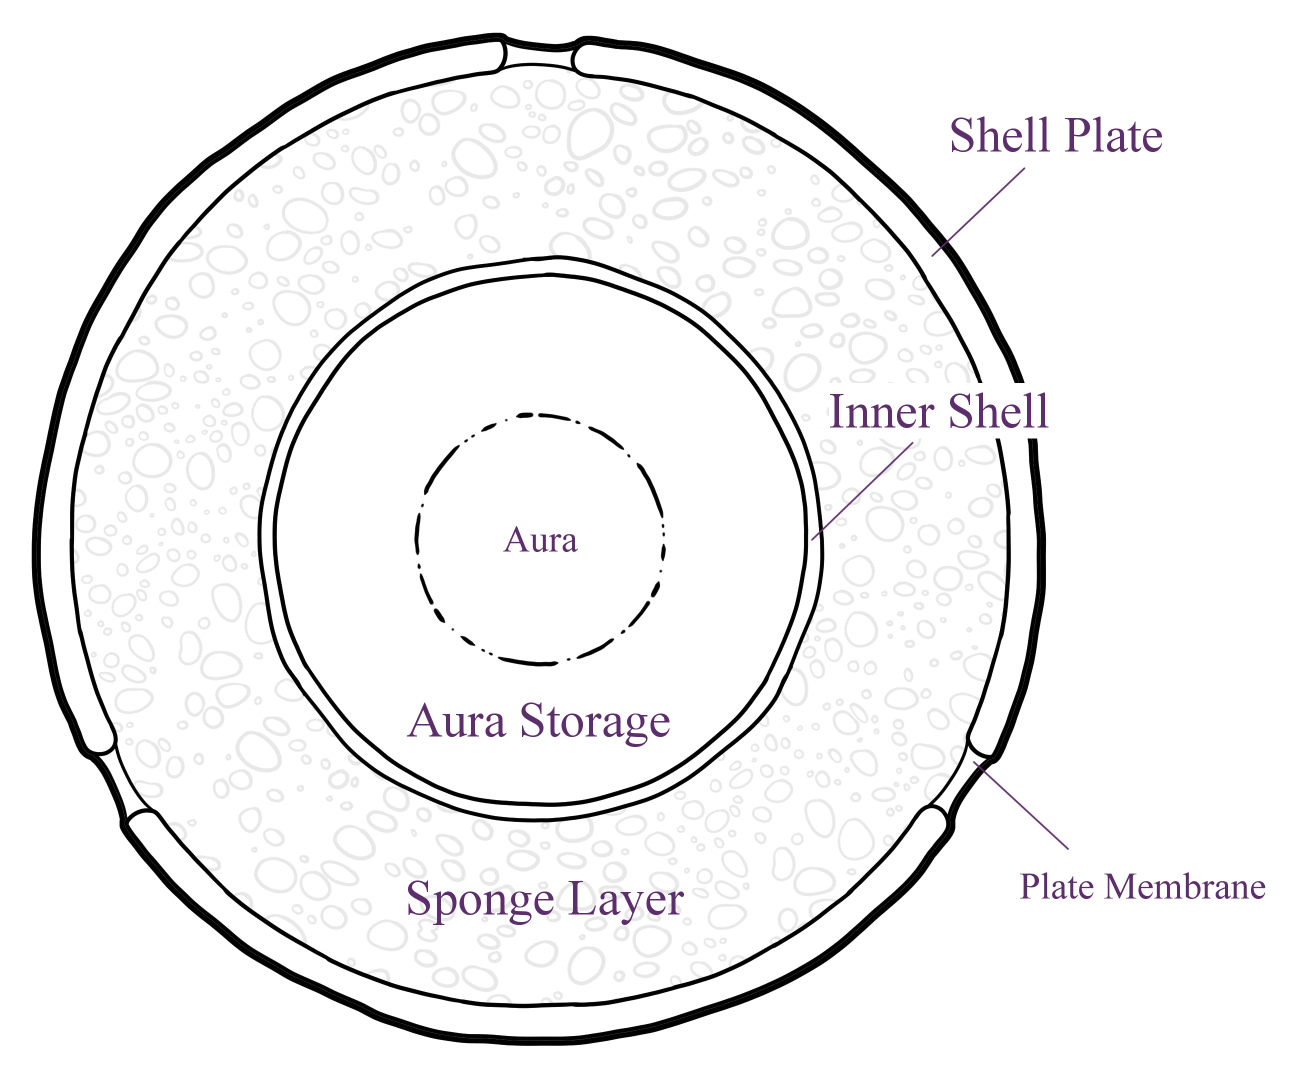 Diagram of a Celestial Core. It is a circle with four rings, which are labeled from outside to inside as 